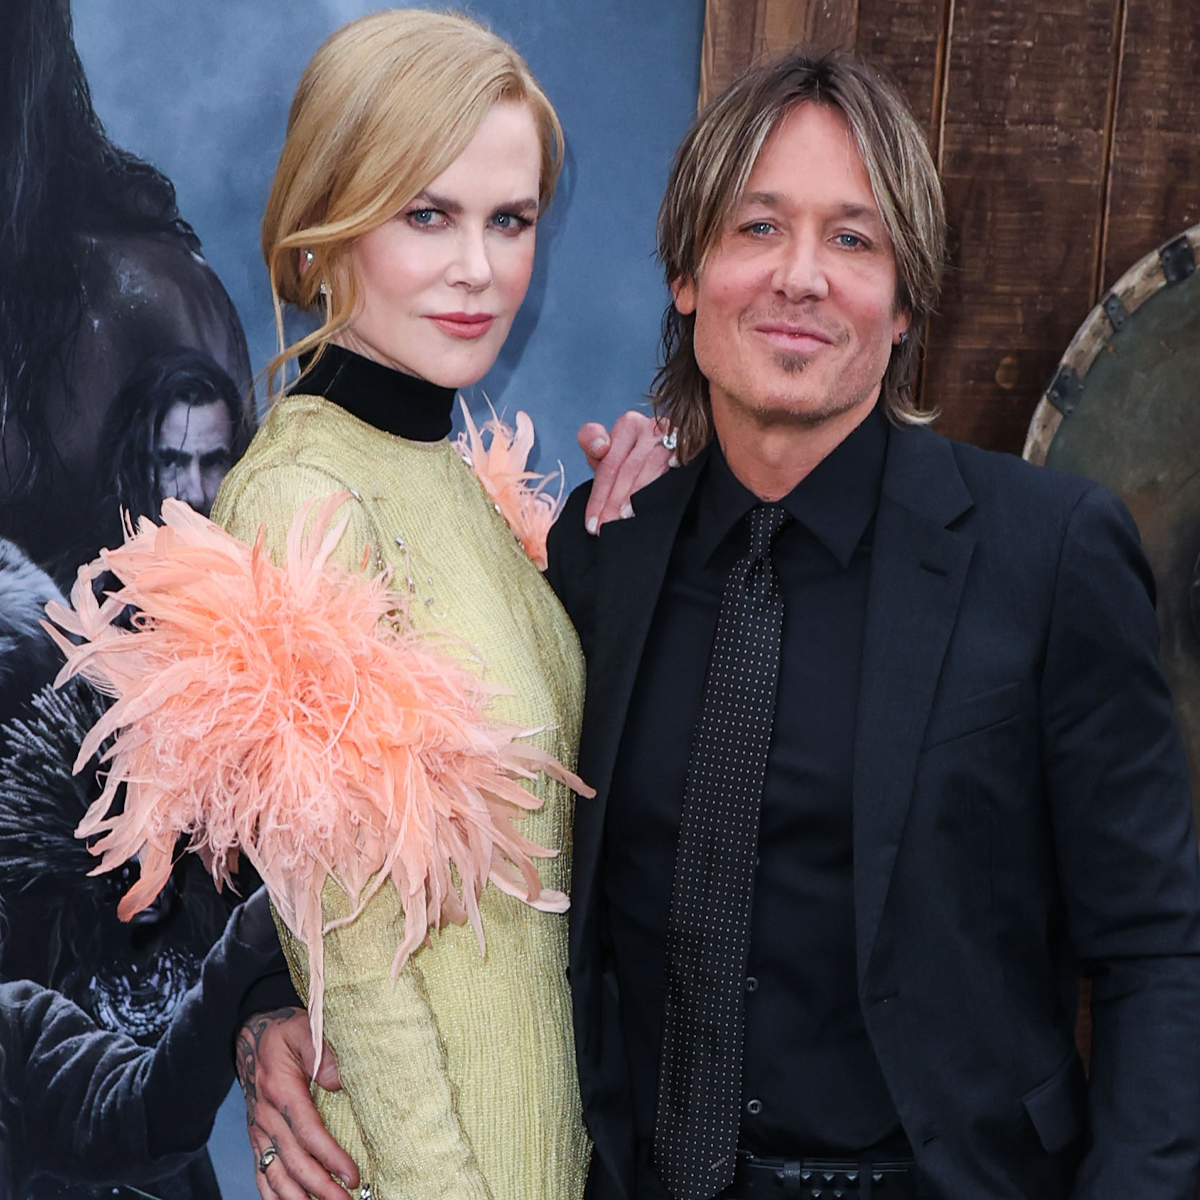 Nicole Kidman Makes A Surprise Appearance At Keith Urban’s Concert